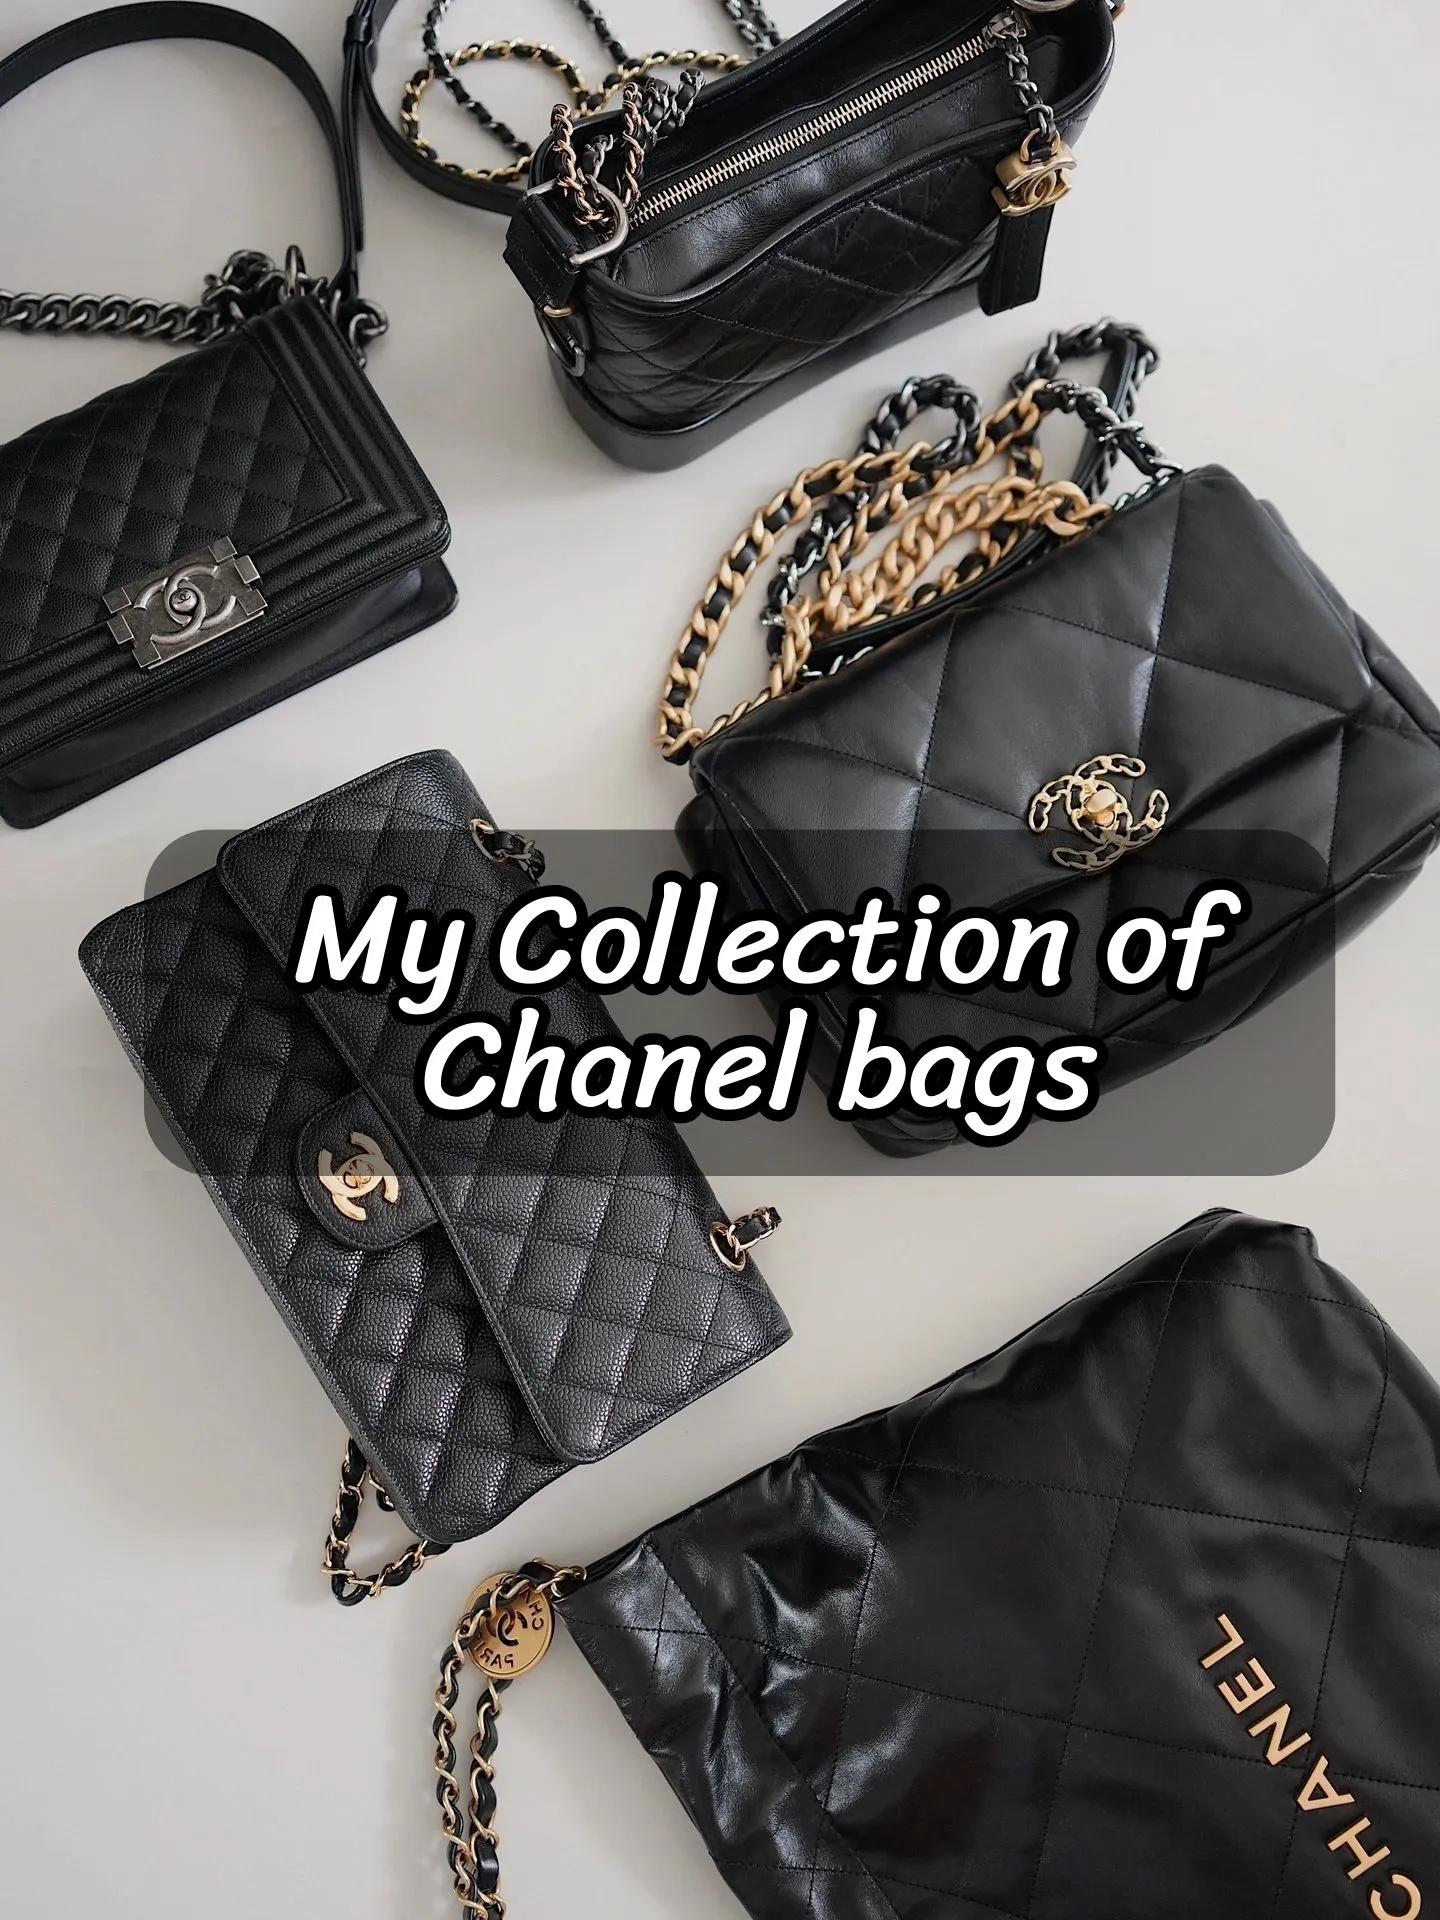 Chanel Black Bag Collection🌟🖤, Gallery posted by Claire Andrews